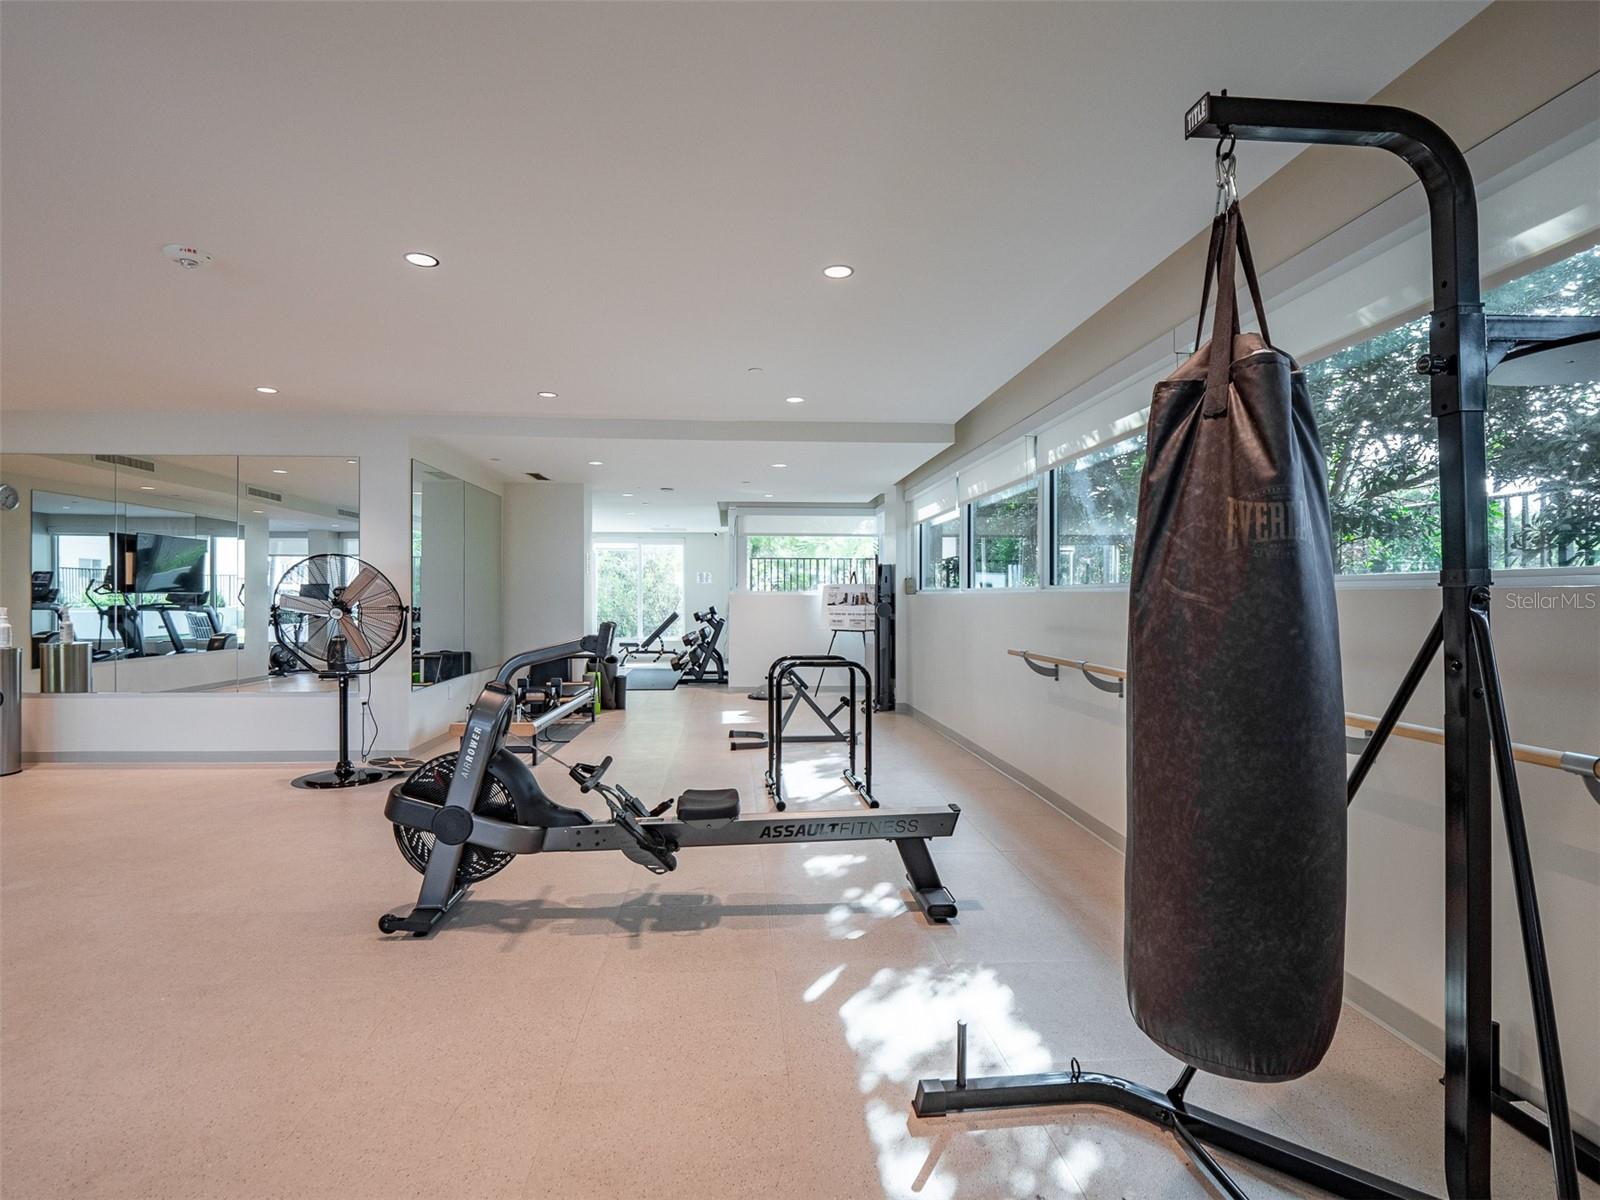 Fitness center with top of the line equipment and marina views